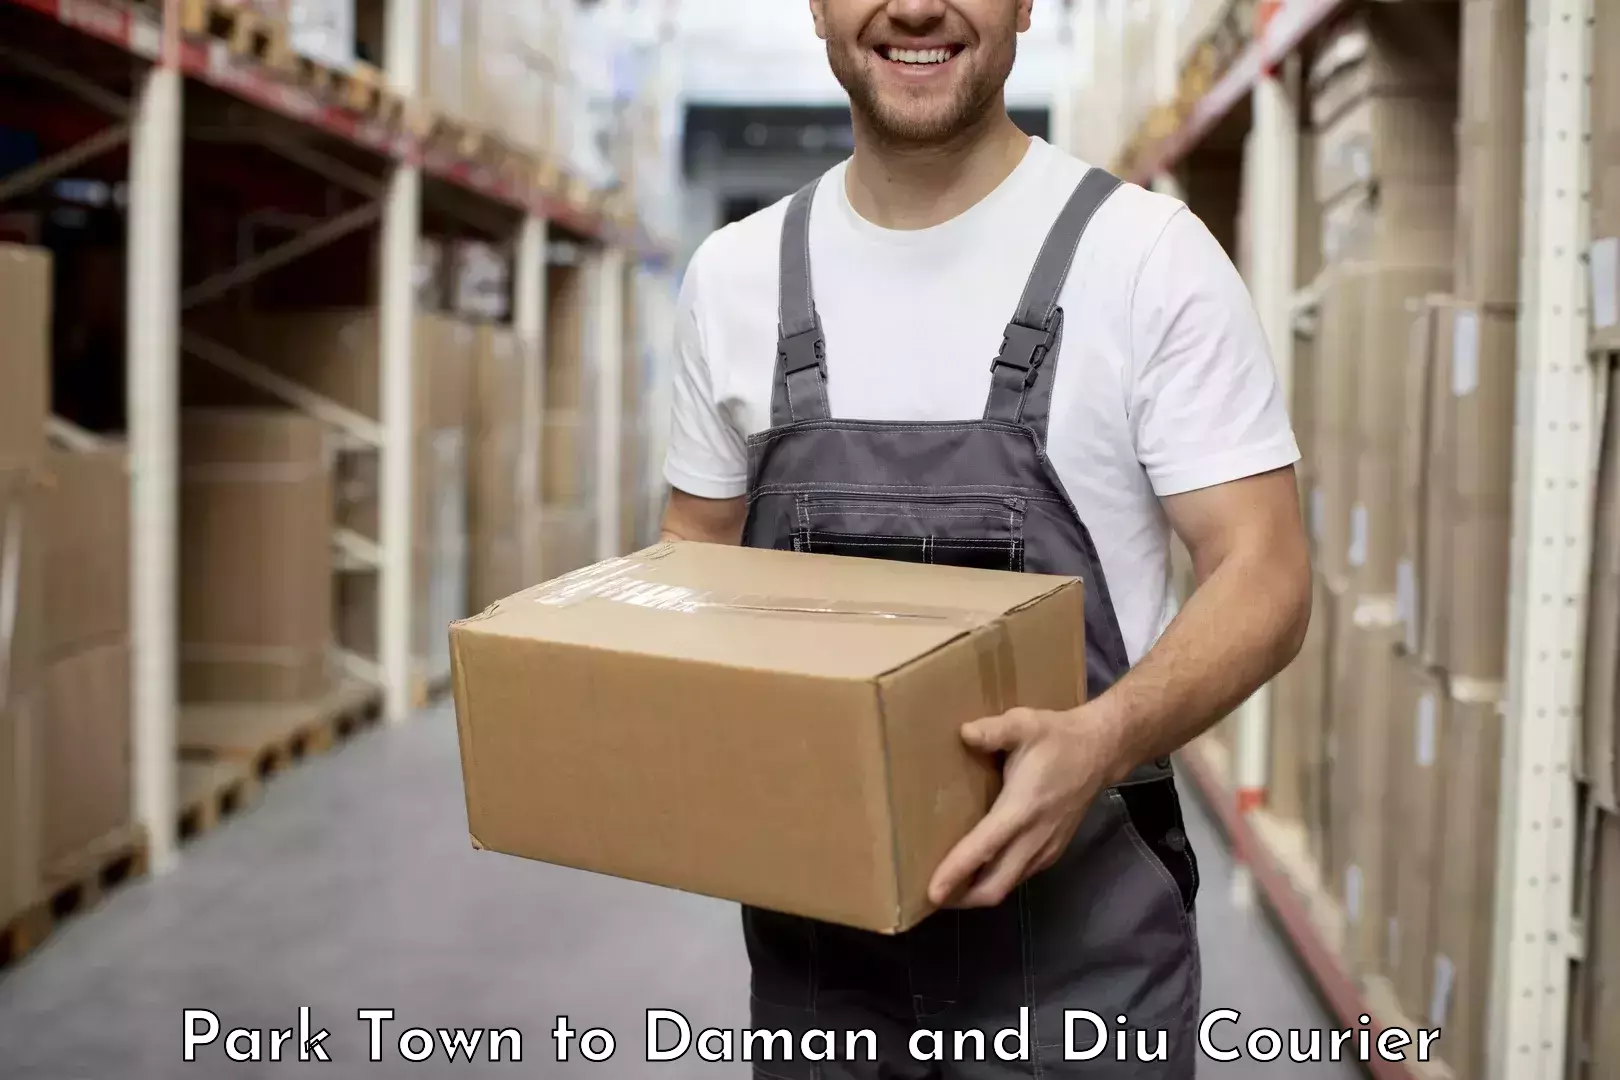 Professional courier handling Park Town to Daman and Diu